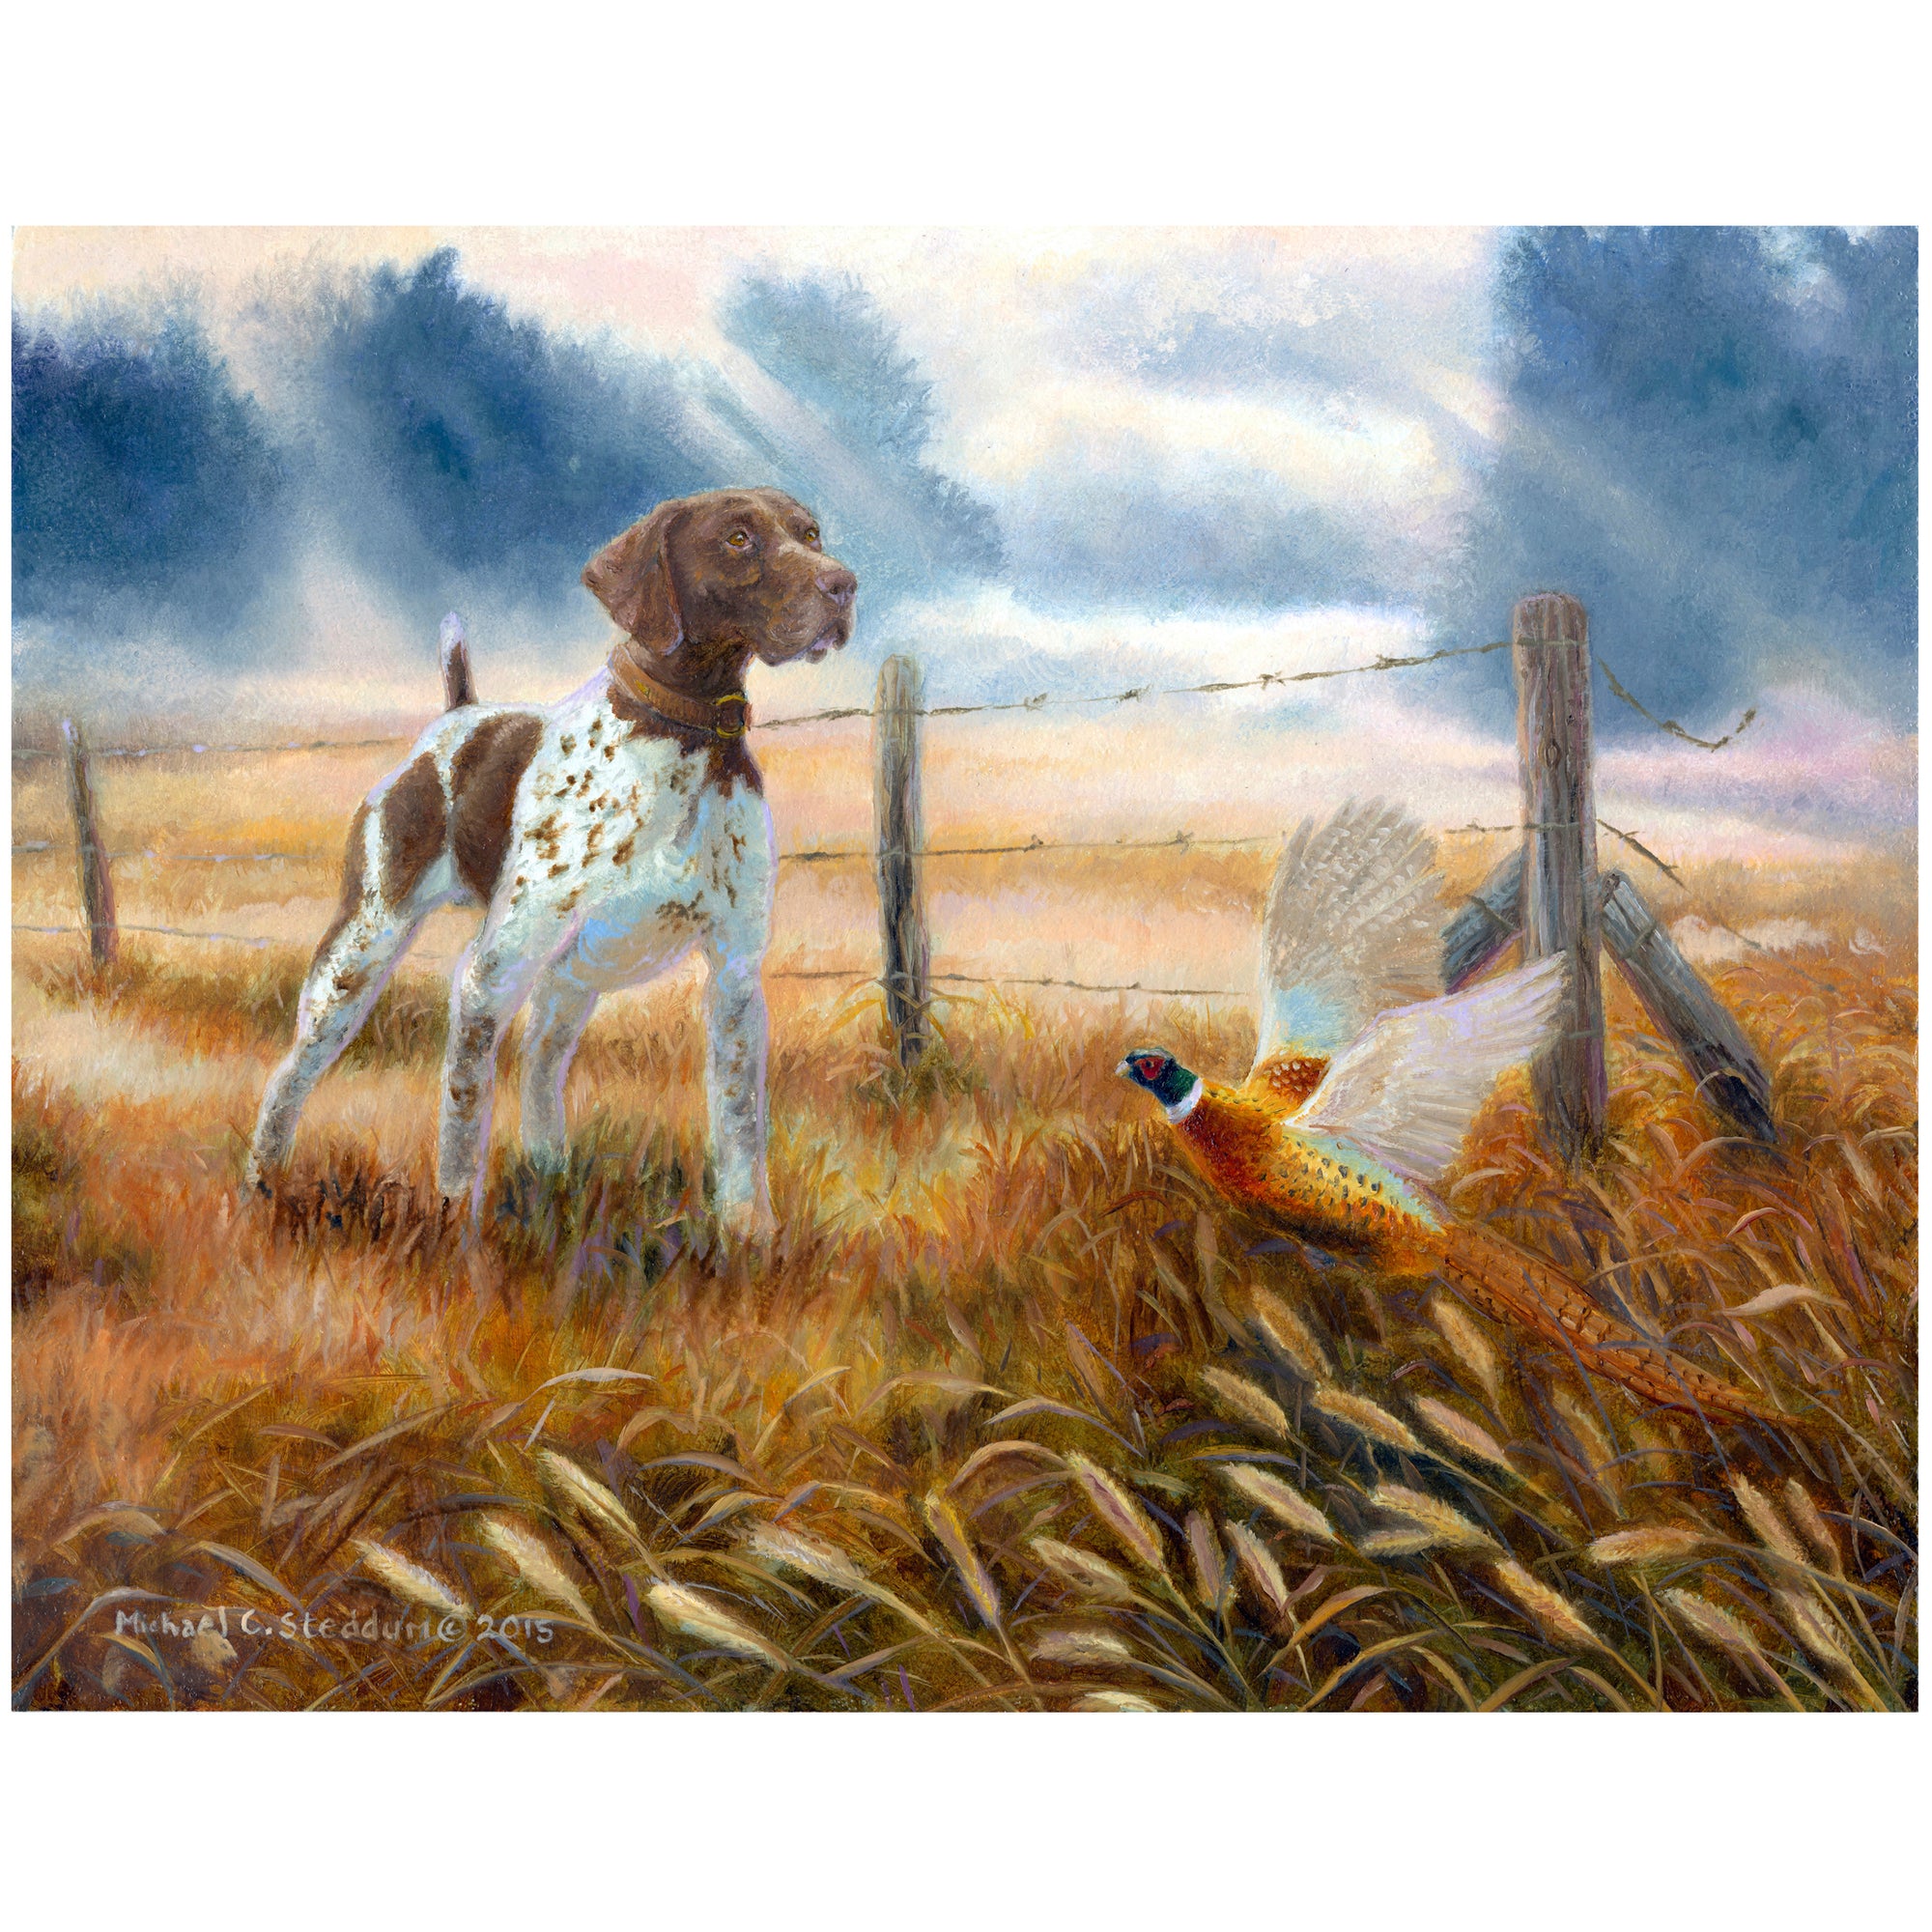 German Shorthaired Pointer Art Reproduction Print – “Last Point of the Day” by Michael Steddum - Limited Edition Signed and Numbered German Shorthair Pointer Art Print